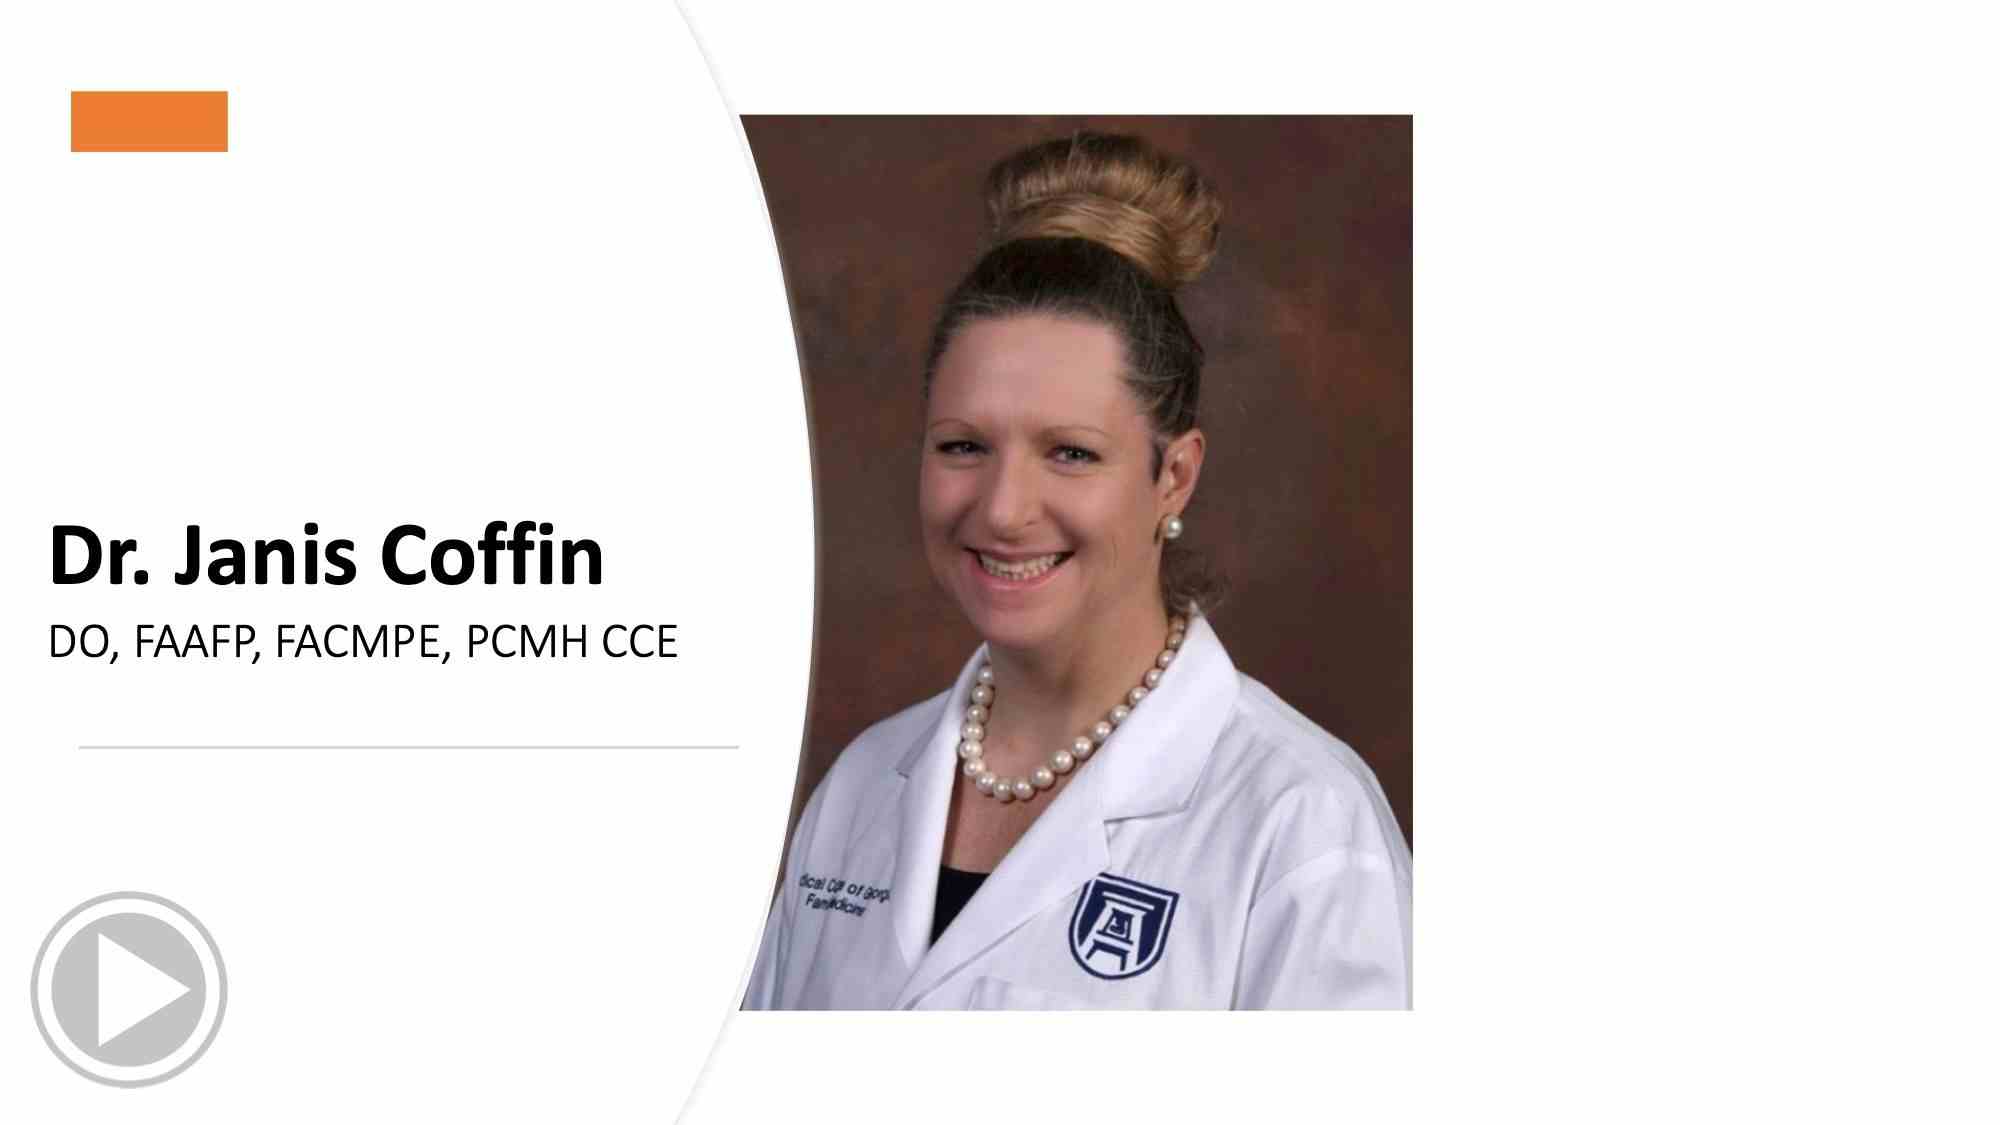 Dr. Janis Coffin, DO, FAAFP, FACMPE, PCMH CCE, gives expert advice